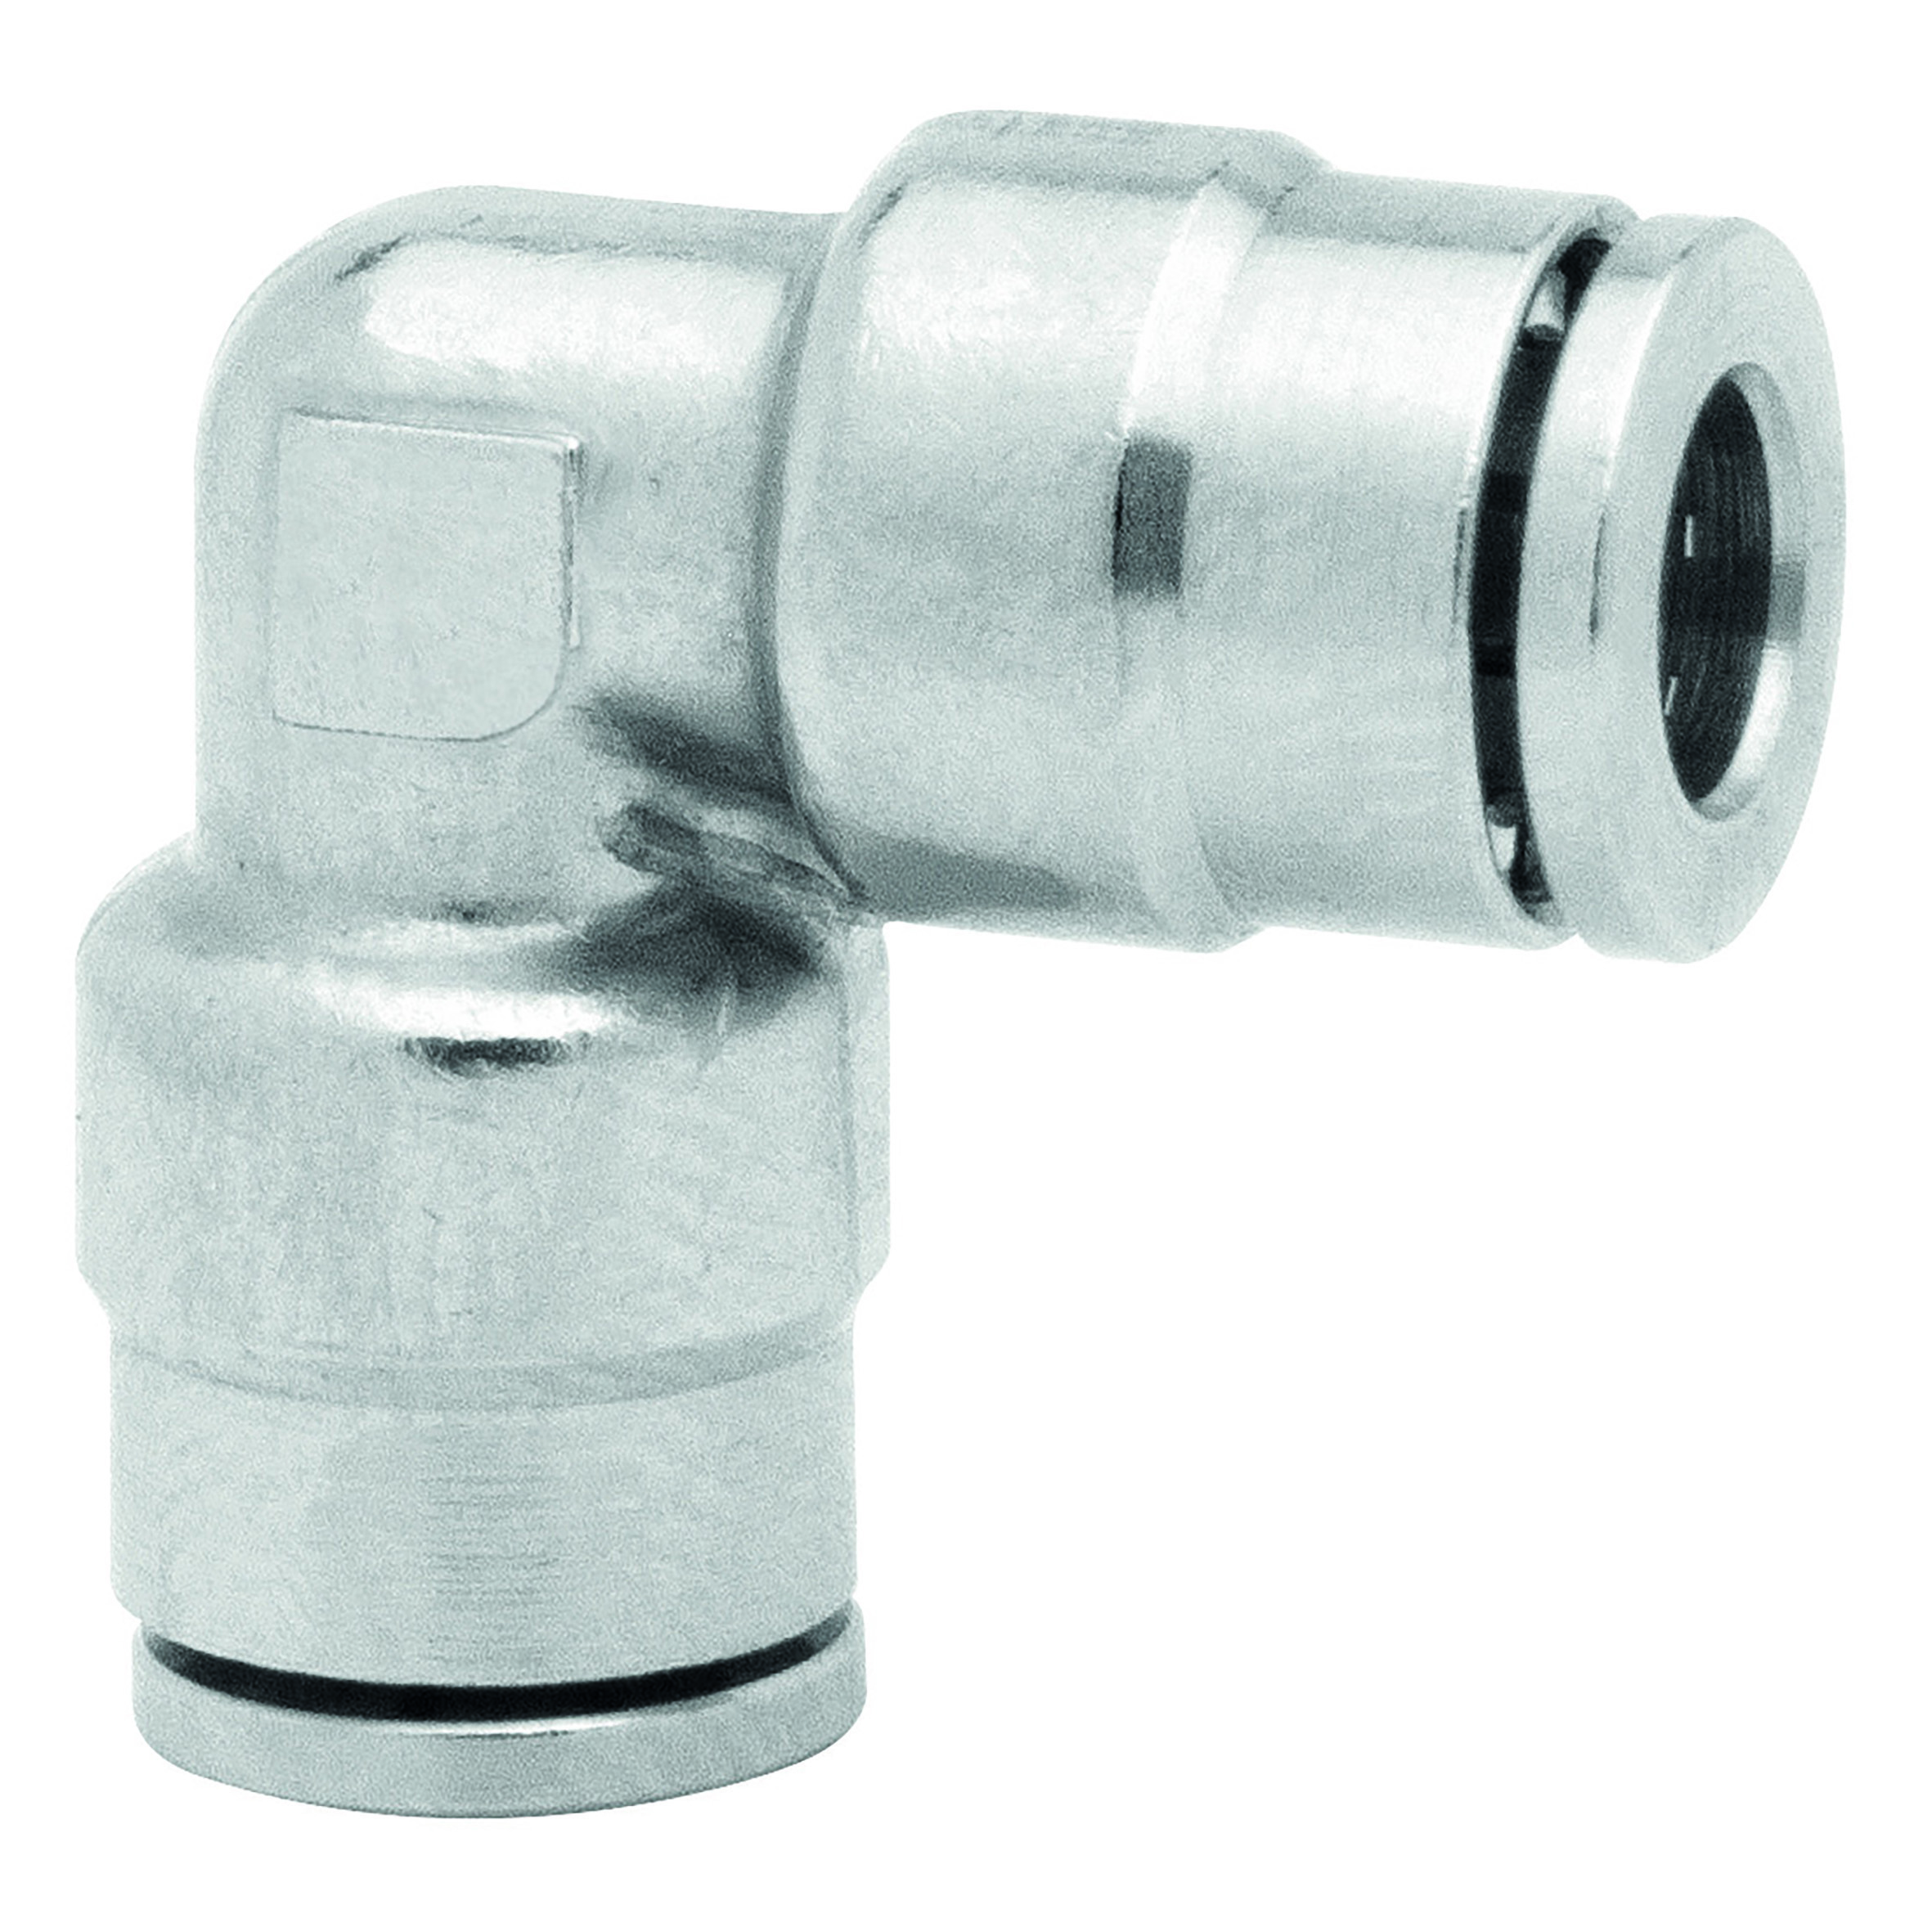 10MM OD EQUAL 90Â° ELBOW CONNECTOR